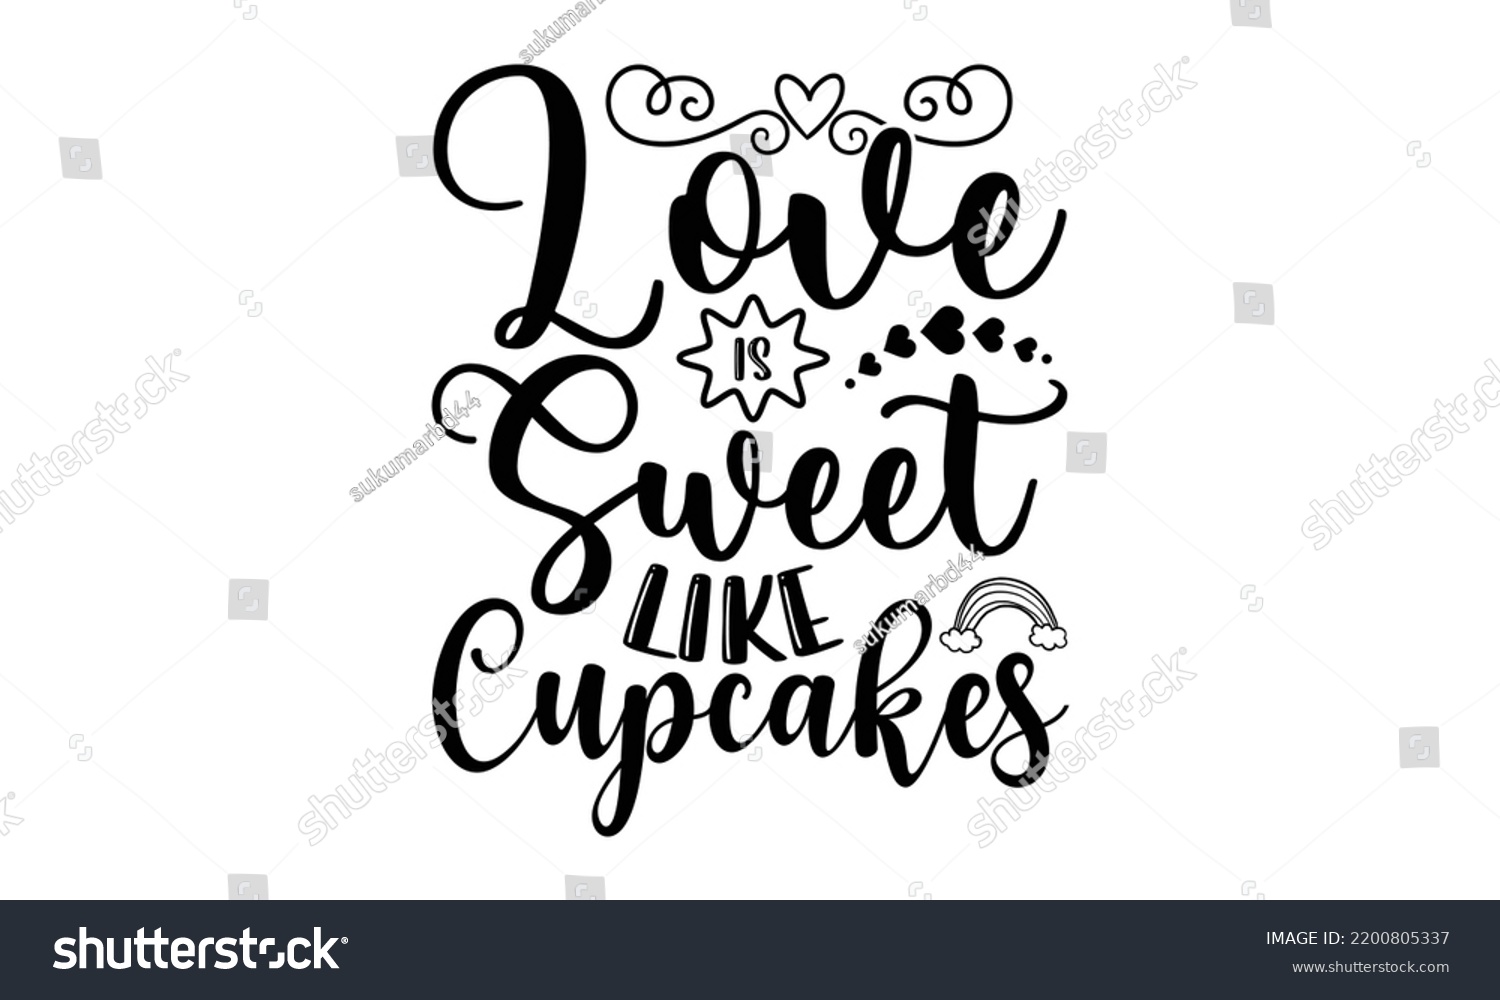 SVG of Love Is Sweet Like Cupcakes - Valentine's Day t shirt design, Hand drawn lettering phrase, calligraphy vector illustration, eps, svg isolated Files for Cutting svg